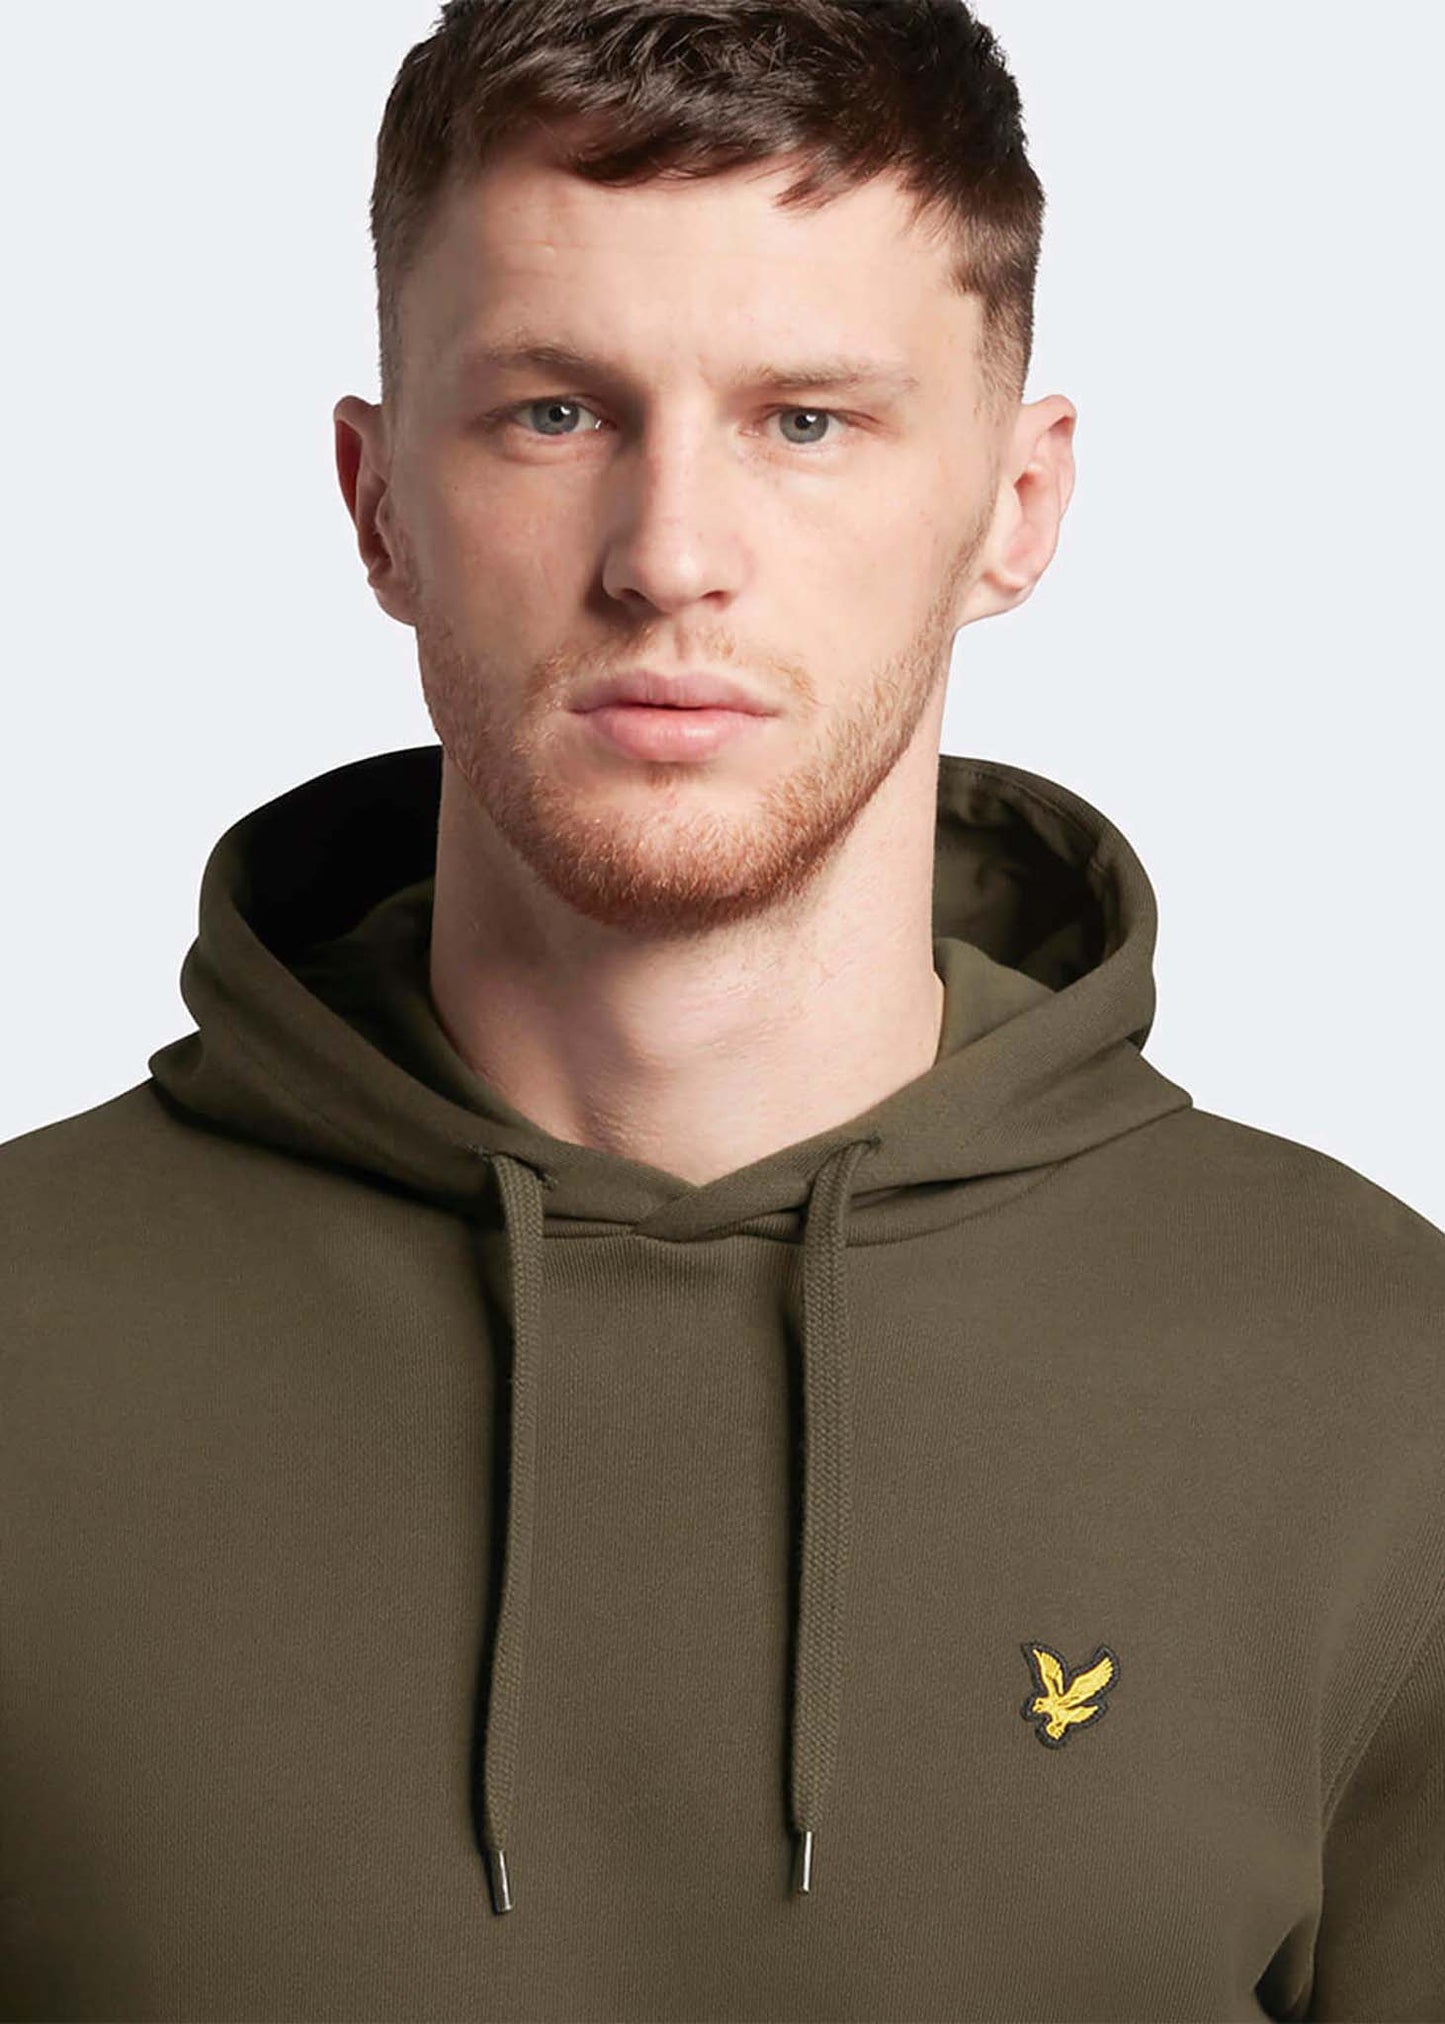 Lyle and Scott hoodie olive